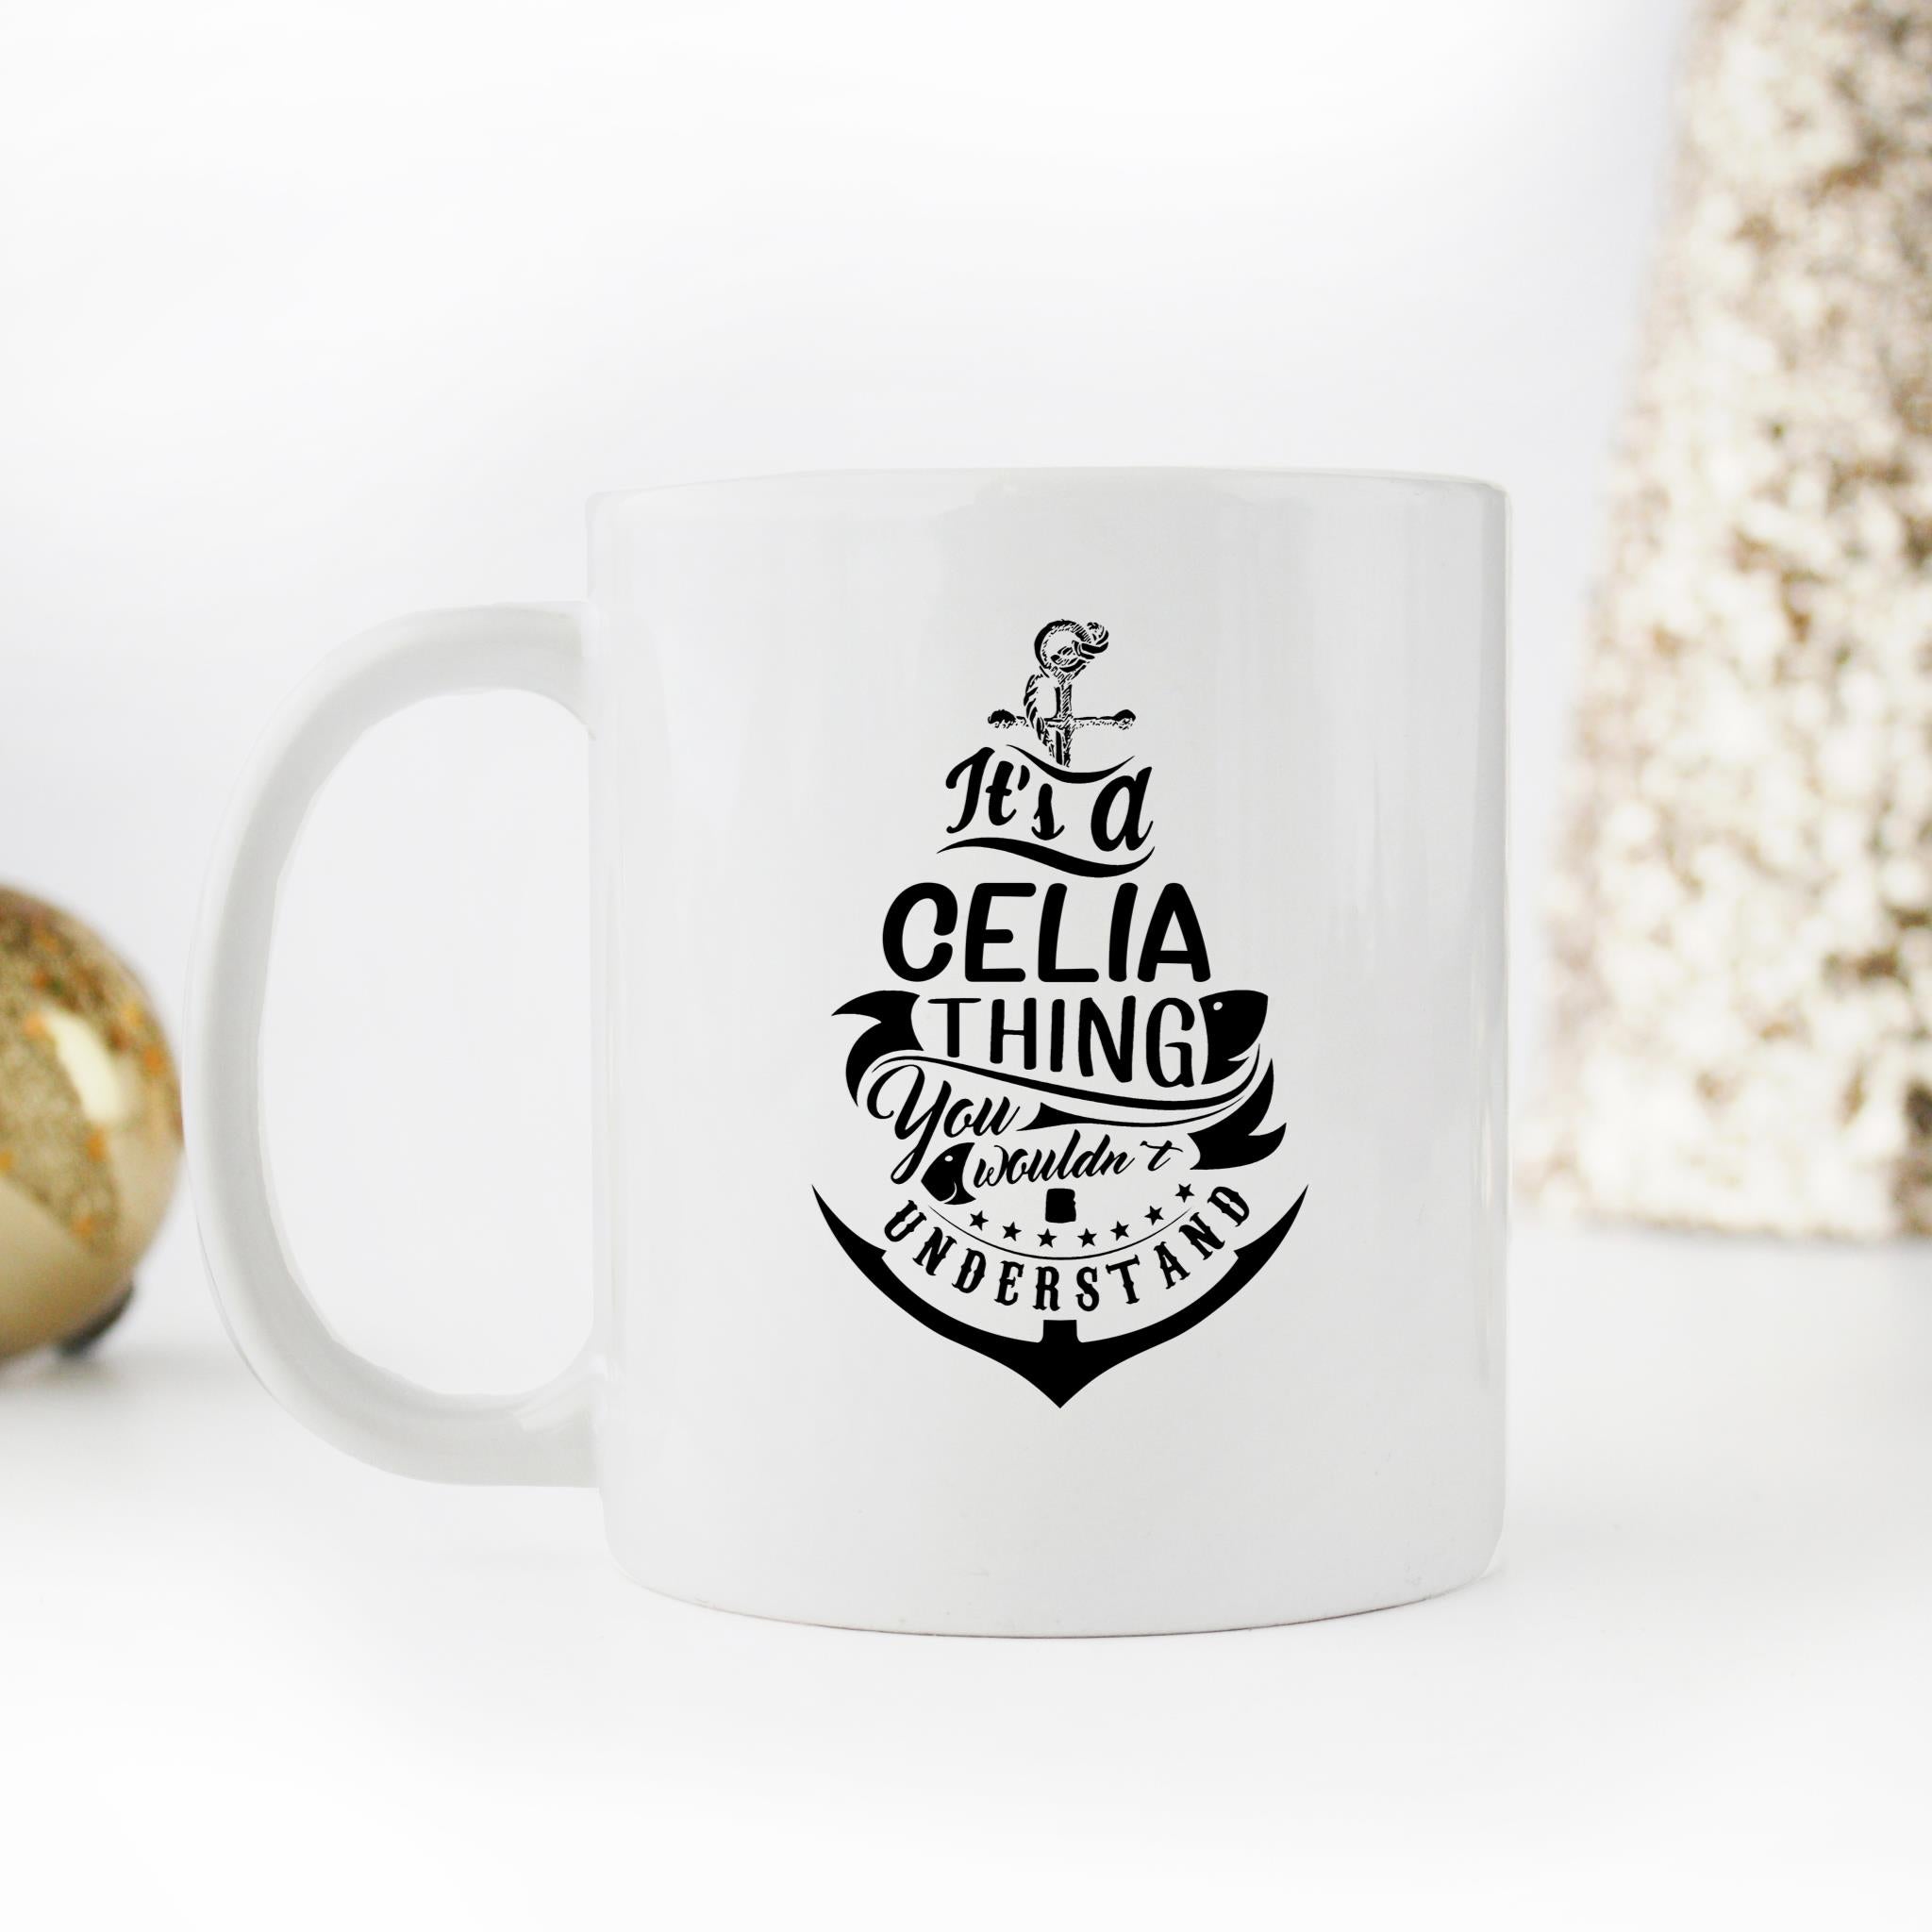 Skitongifts Funny Ceramic Novelty Coffee Mug Best Funny Registry By Name Tags It's Celia Thing You Wouldn't Understand 0VO3IrQ